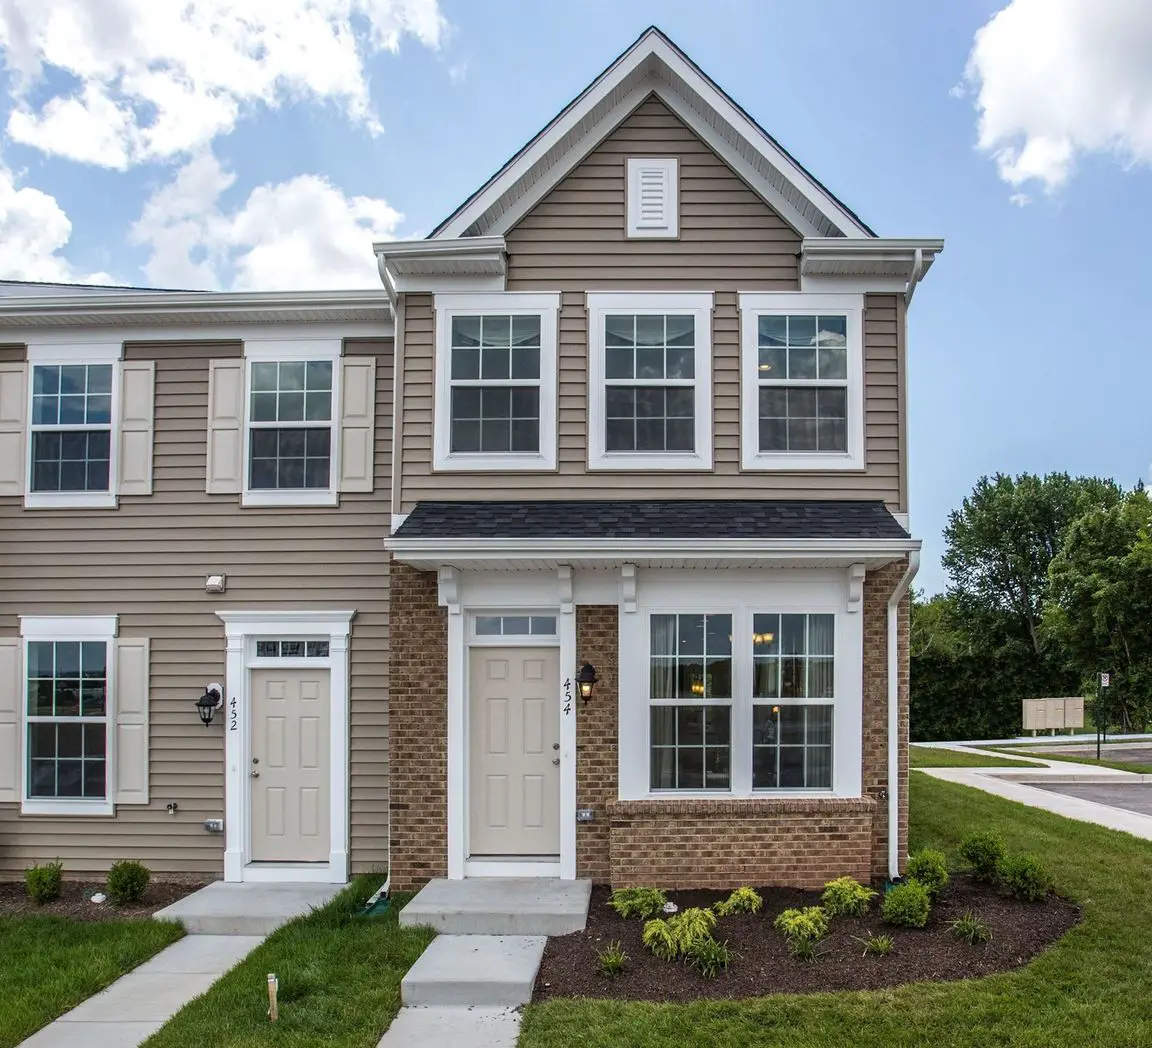 Frederick, MD 21702 New Homes For Sale